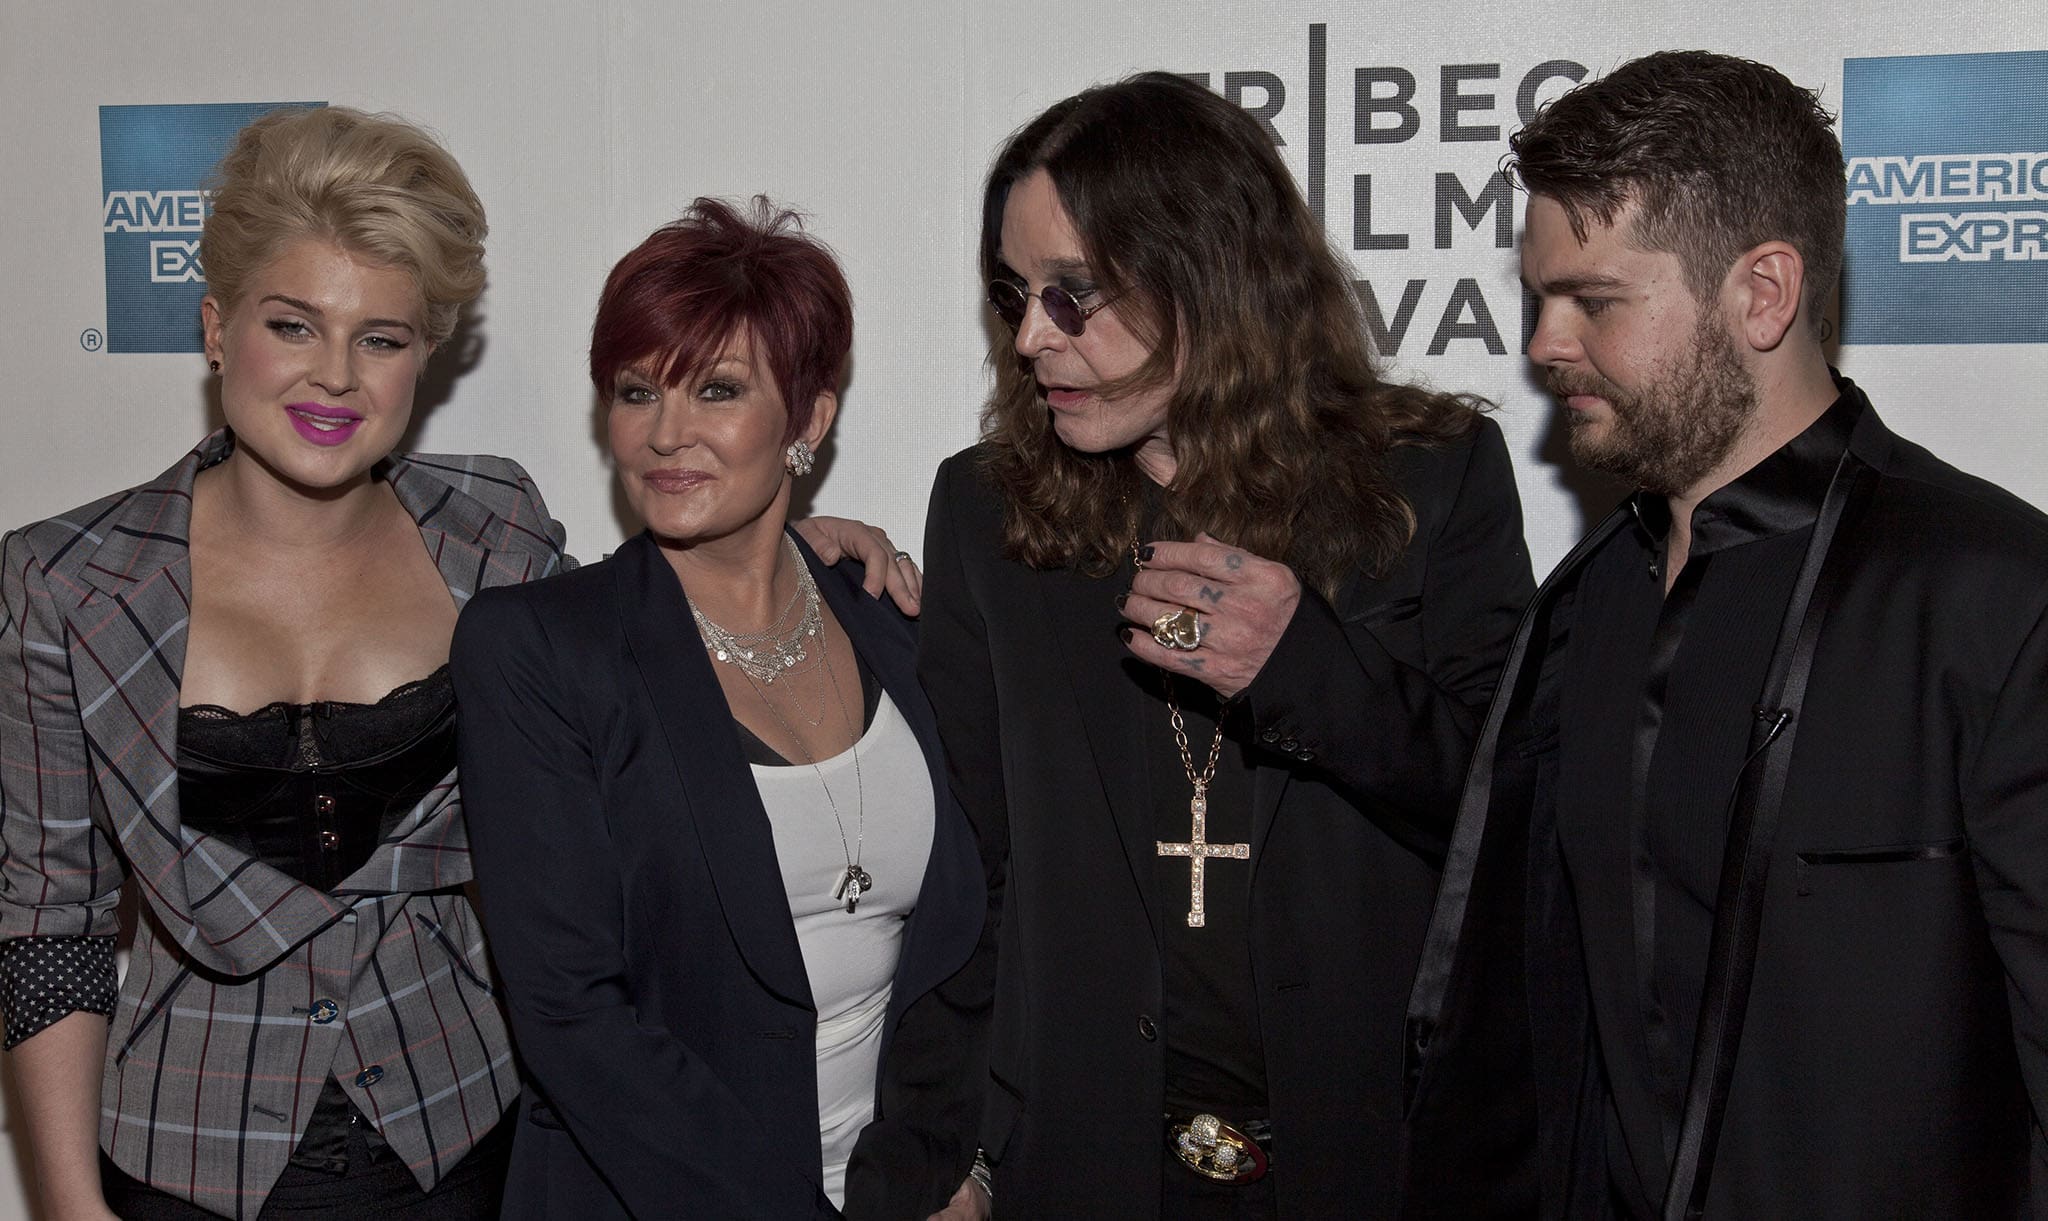 Kelly Osbourne with mom Sharon, dad Ozzy, and brother Jack pictured in 2011 at the premiere of God Bless Ozzy Osbourne during the 10th annual Tribeca Film Festival